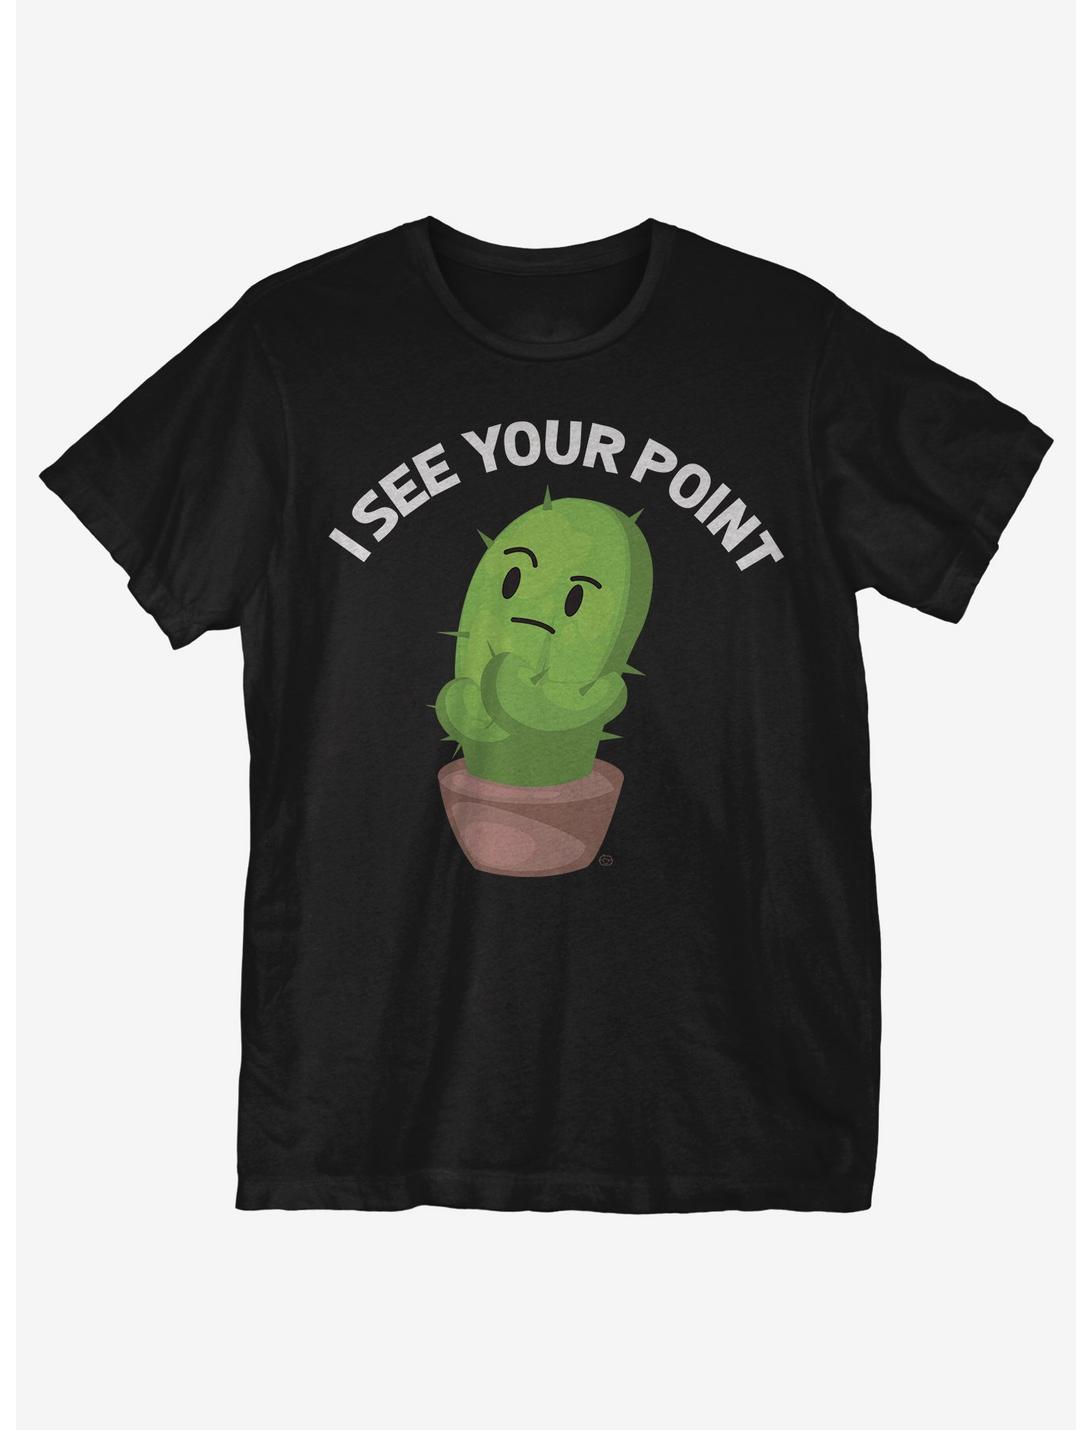 I See Your Point Cactus T-Shirt, BLACK, hi-res